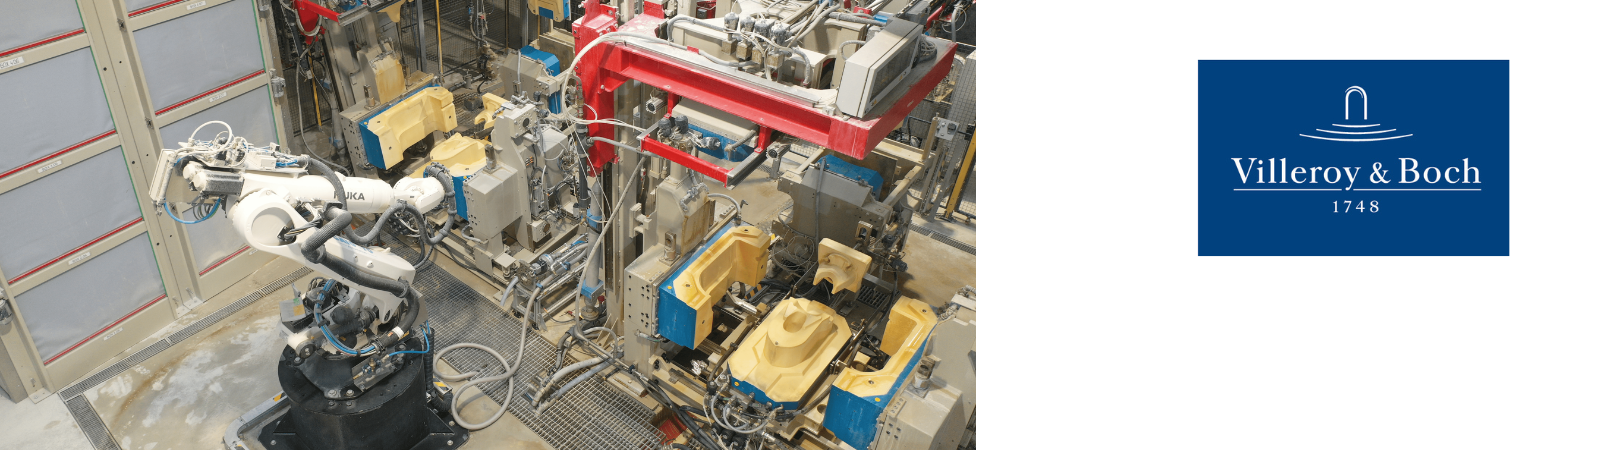 Villeroy & Boch Hungary doubles casting machinery with SACMI AVM